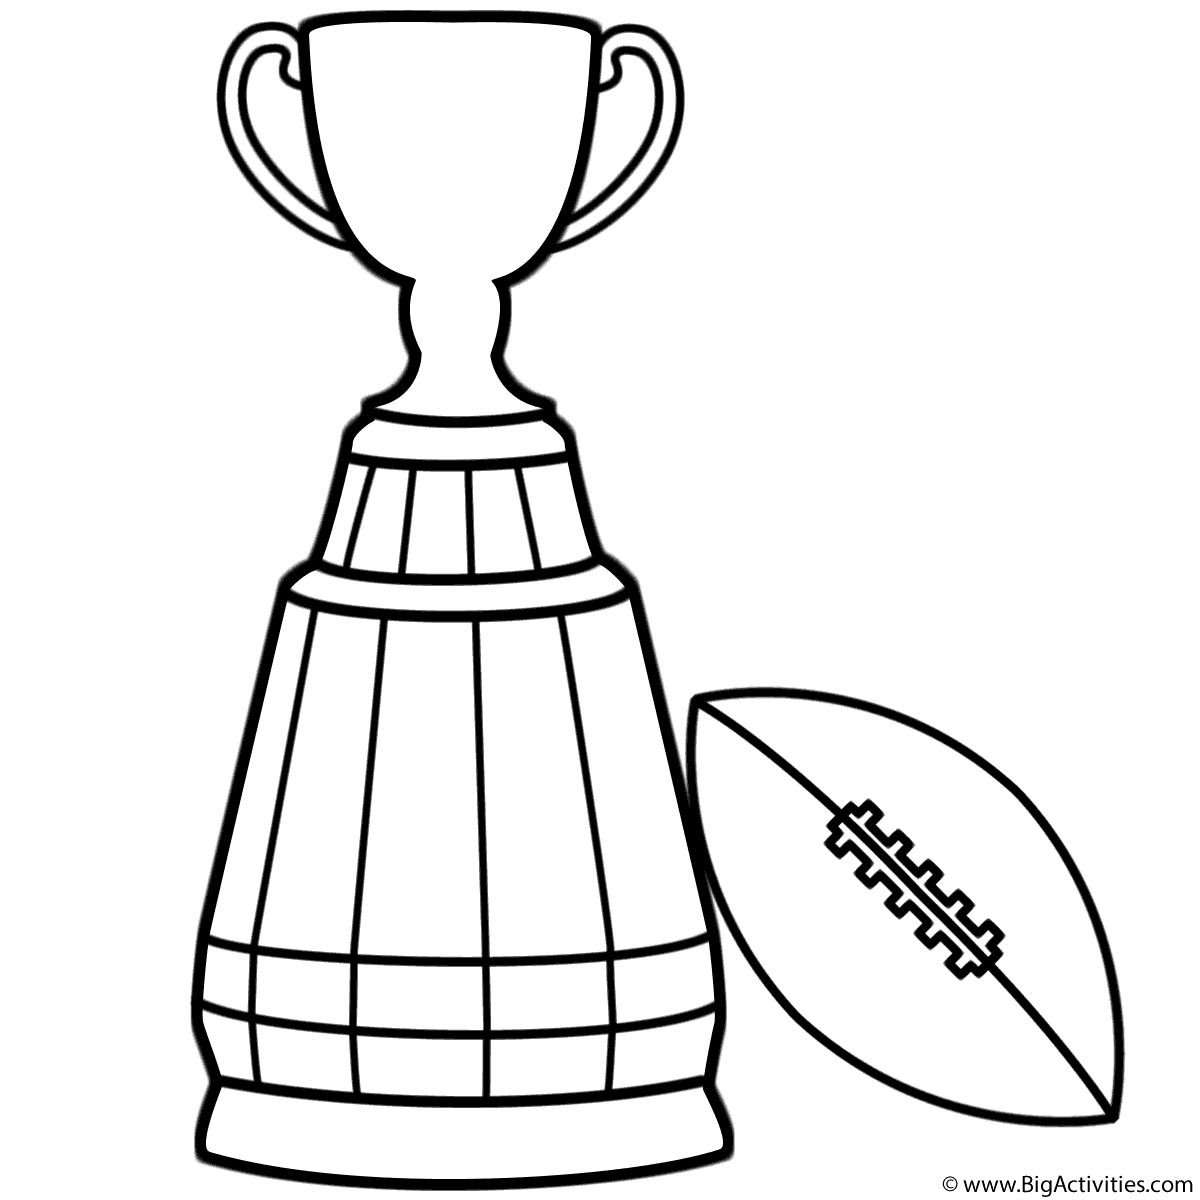 Bowl clipart coloring page. Super trophy with football